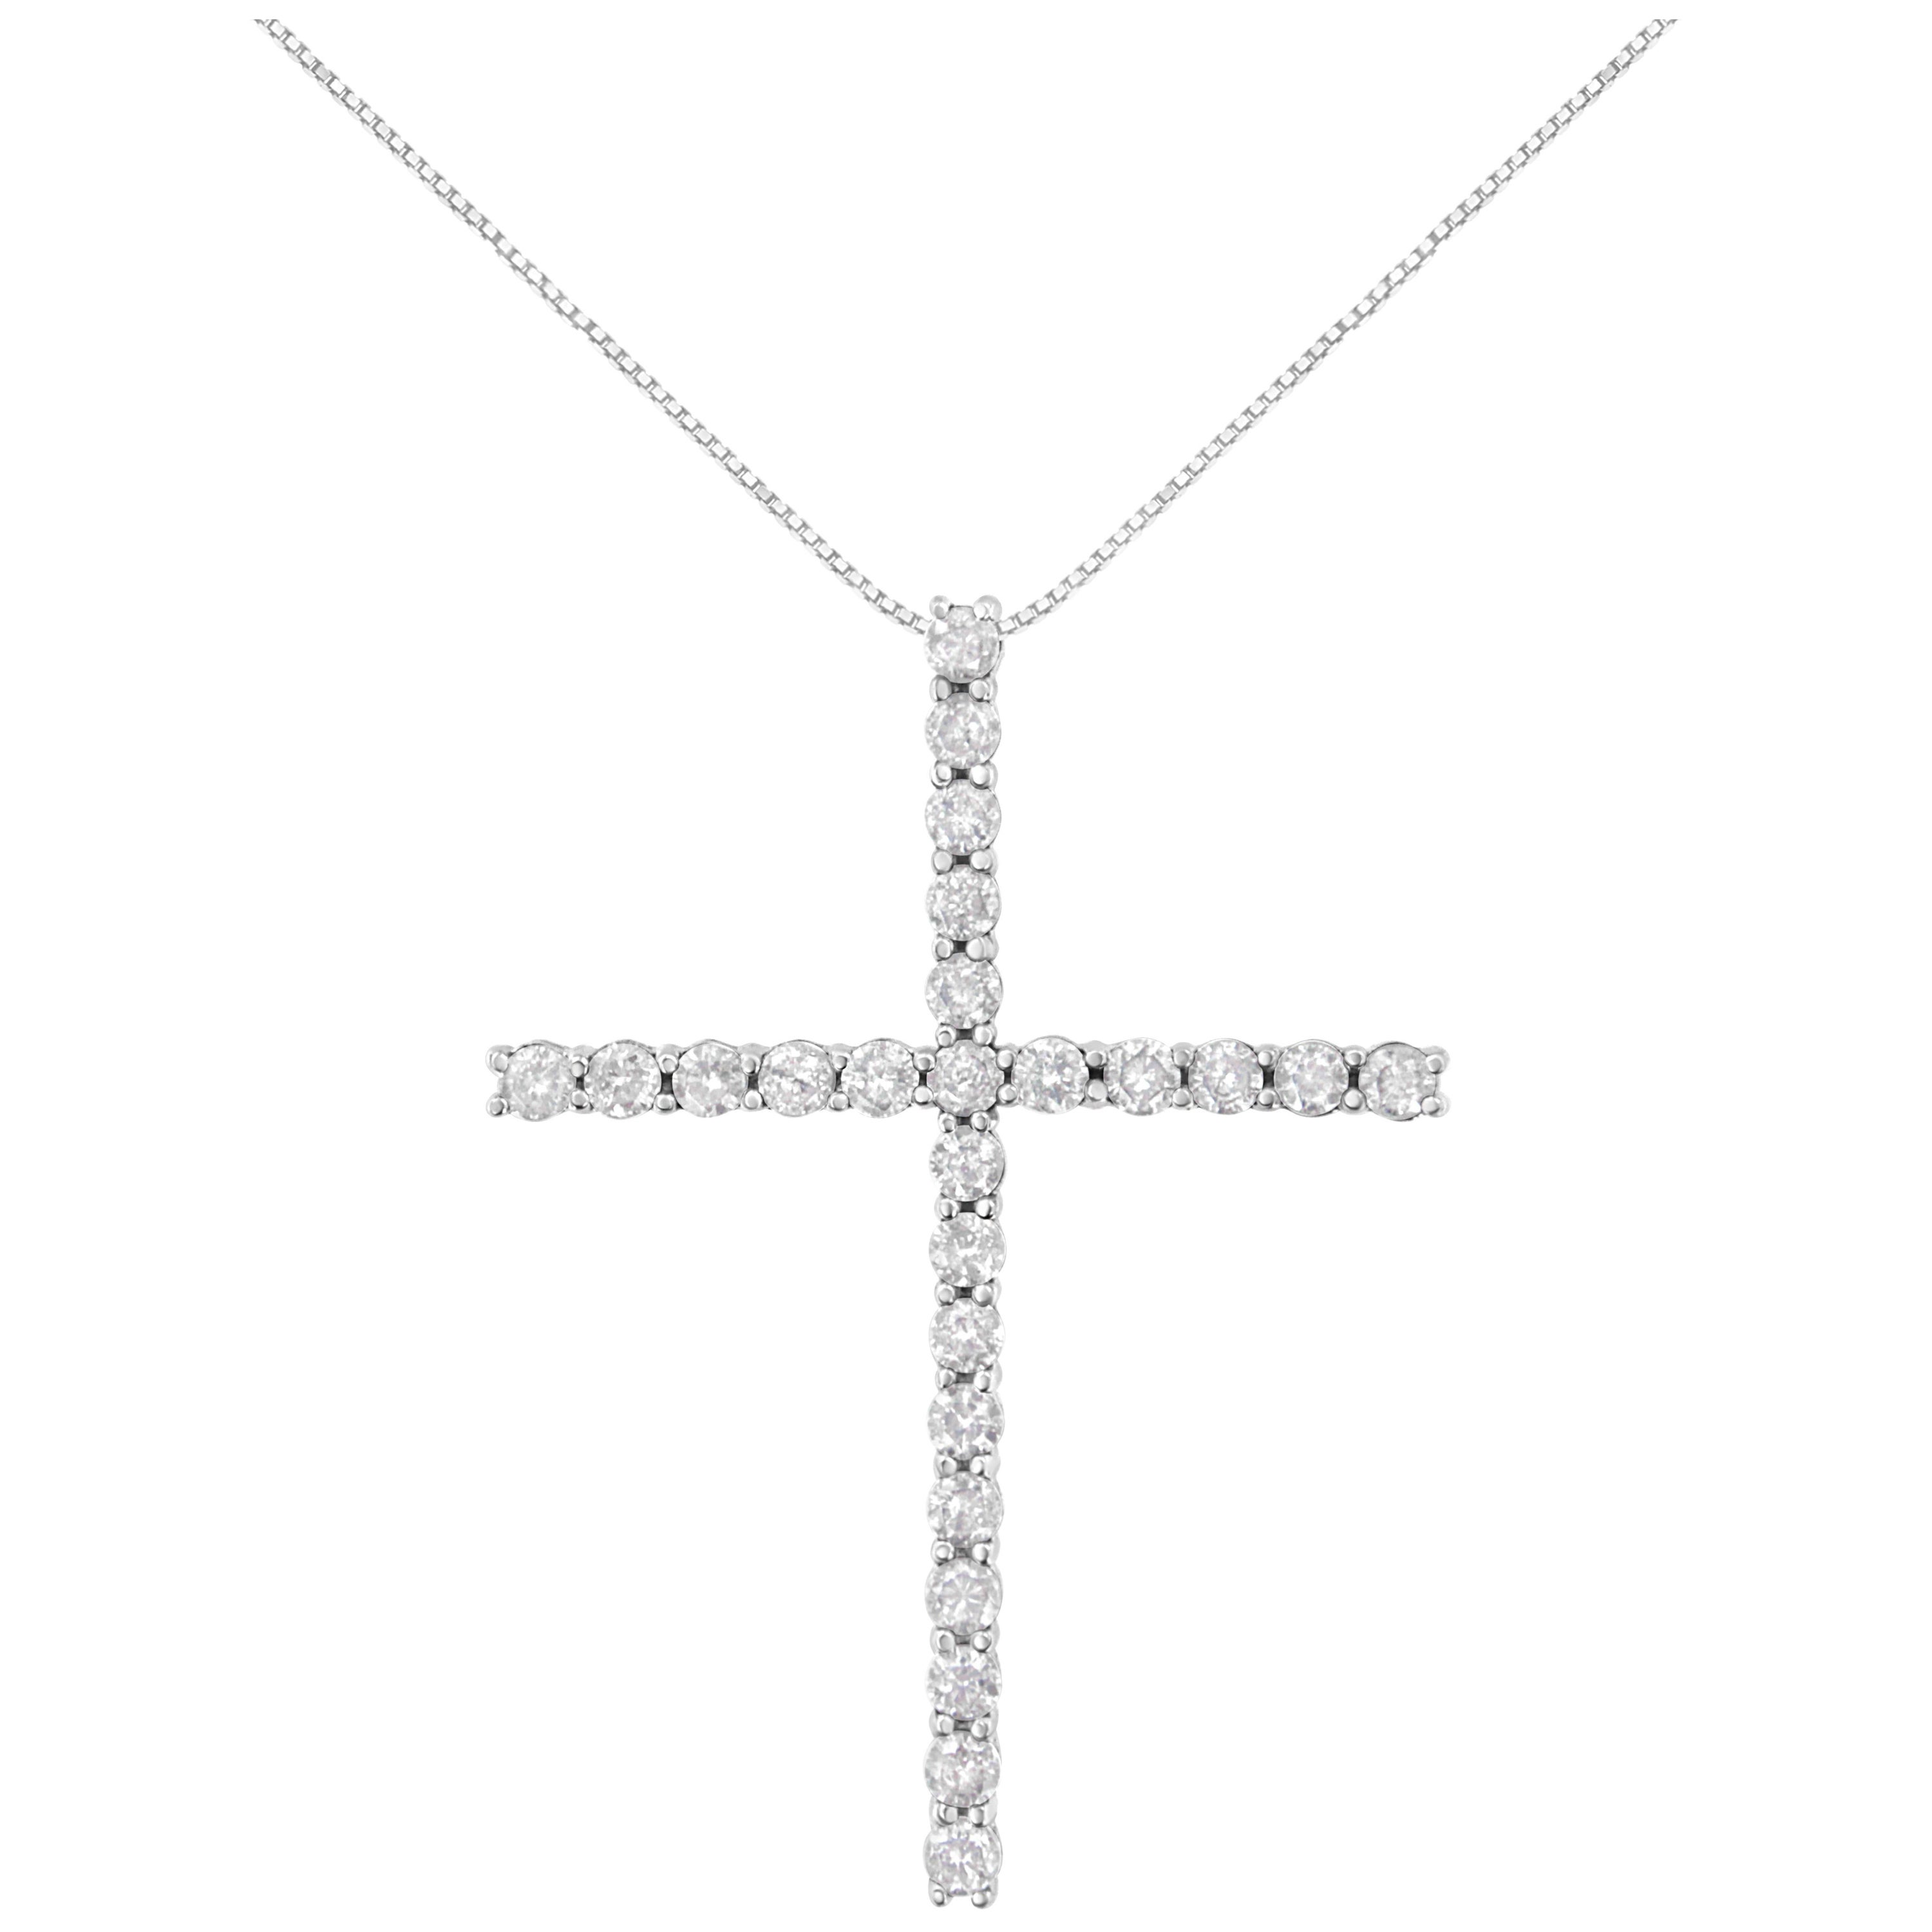 .925 Sterling Silver 2 1/2 cttw Diamond Cross Pendant Necklace (H-I, I2-I3) For Sale